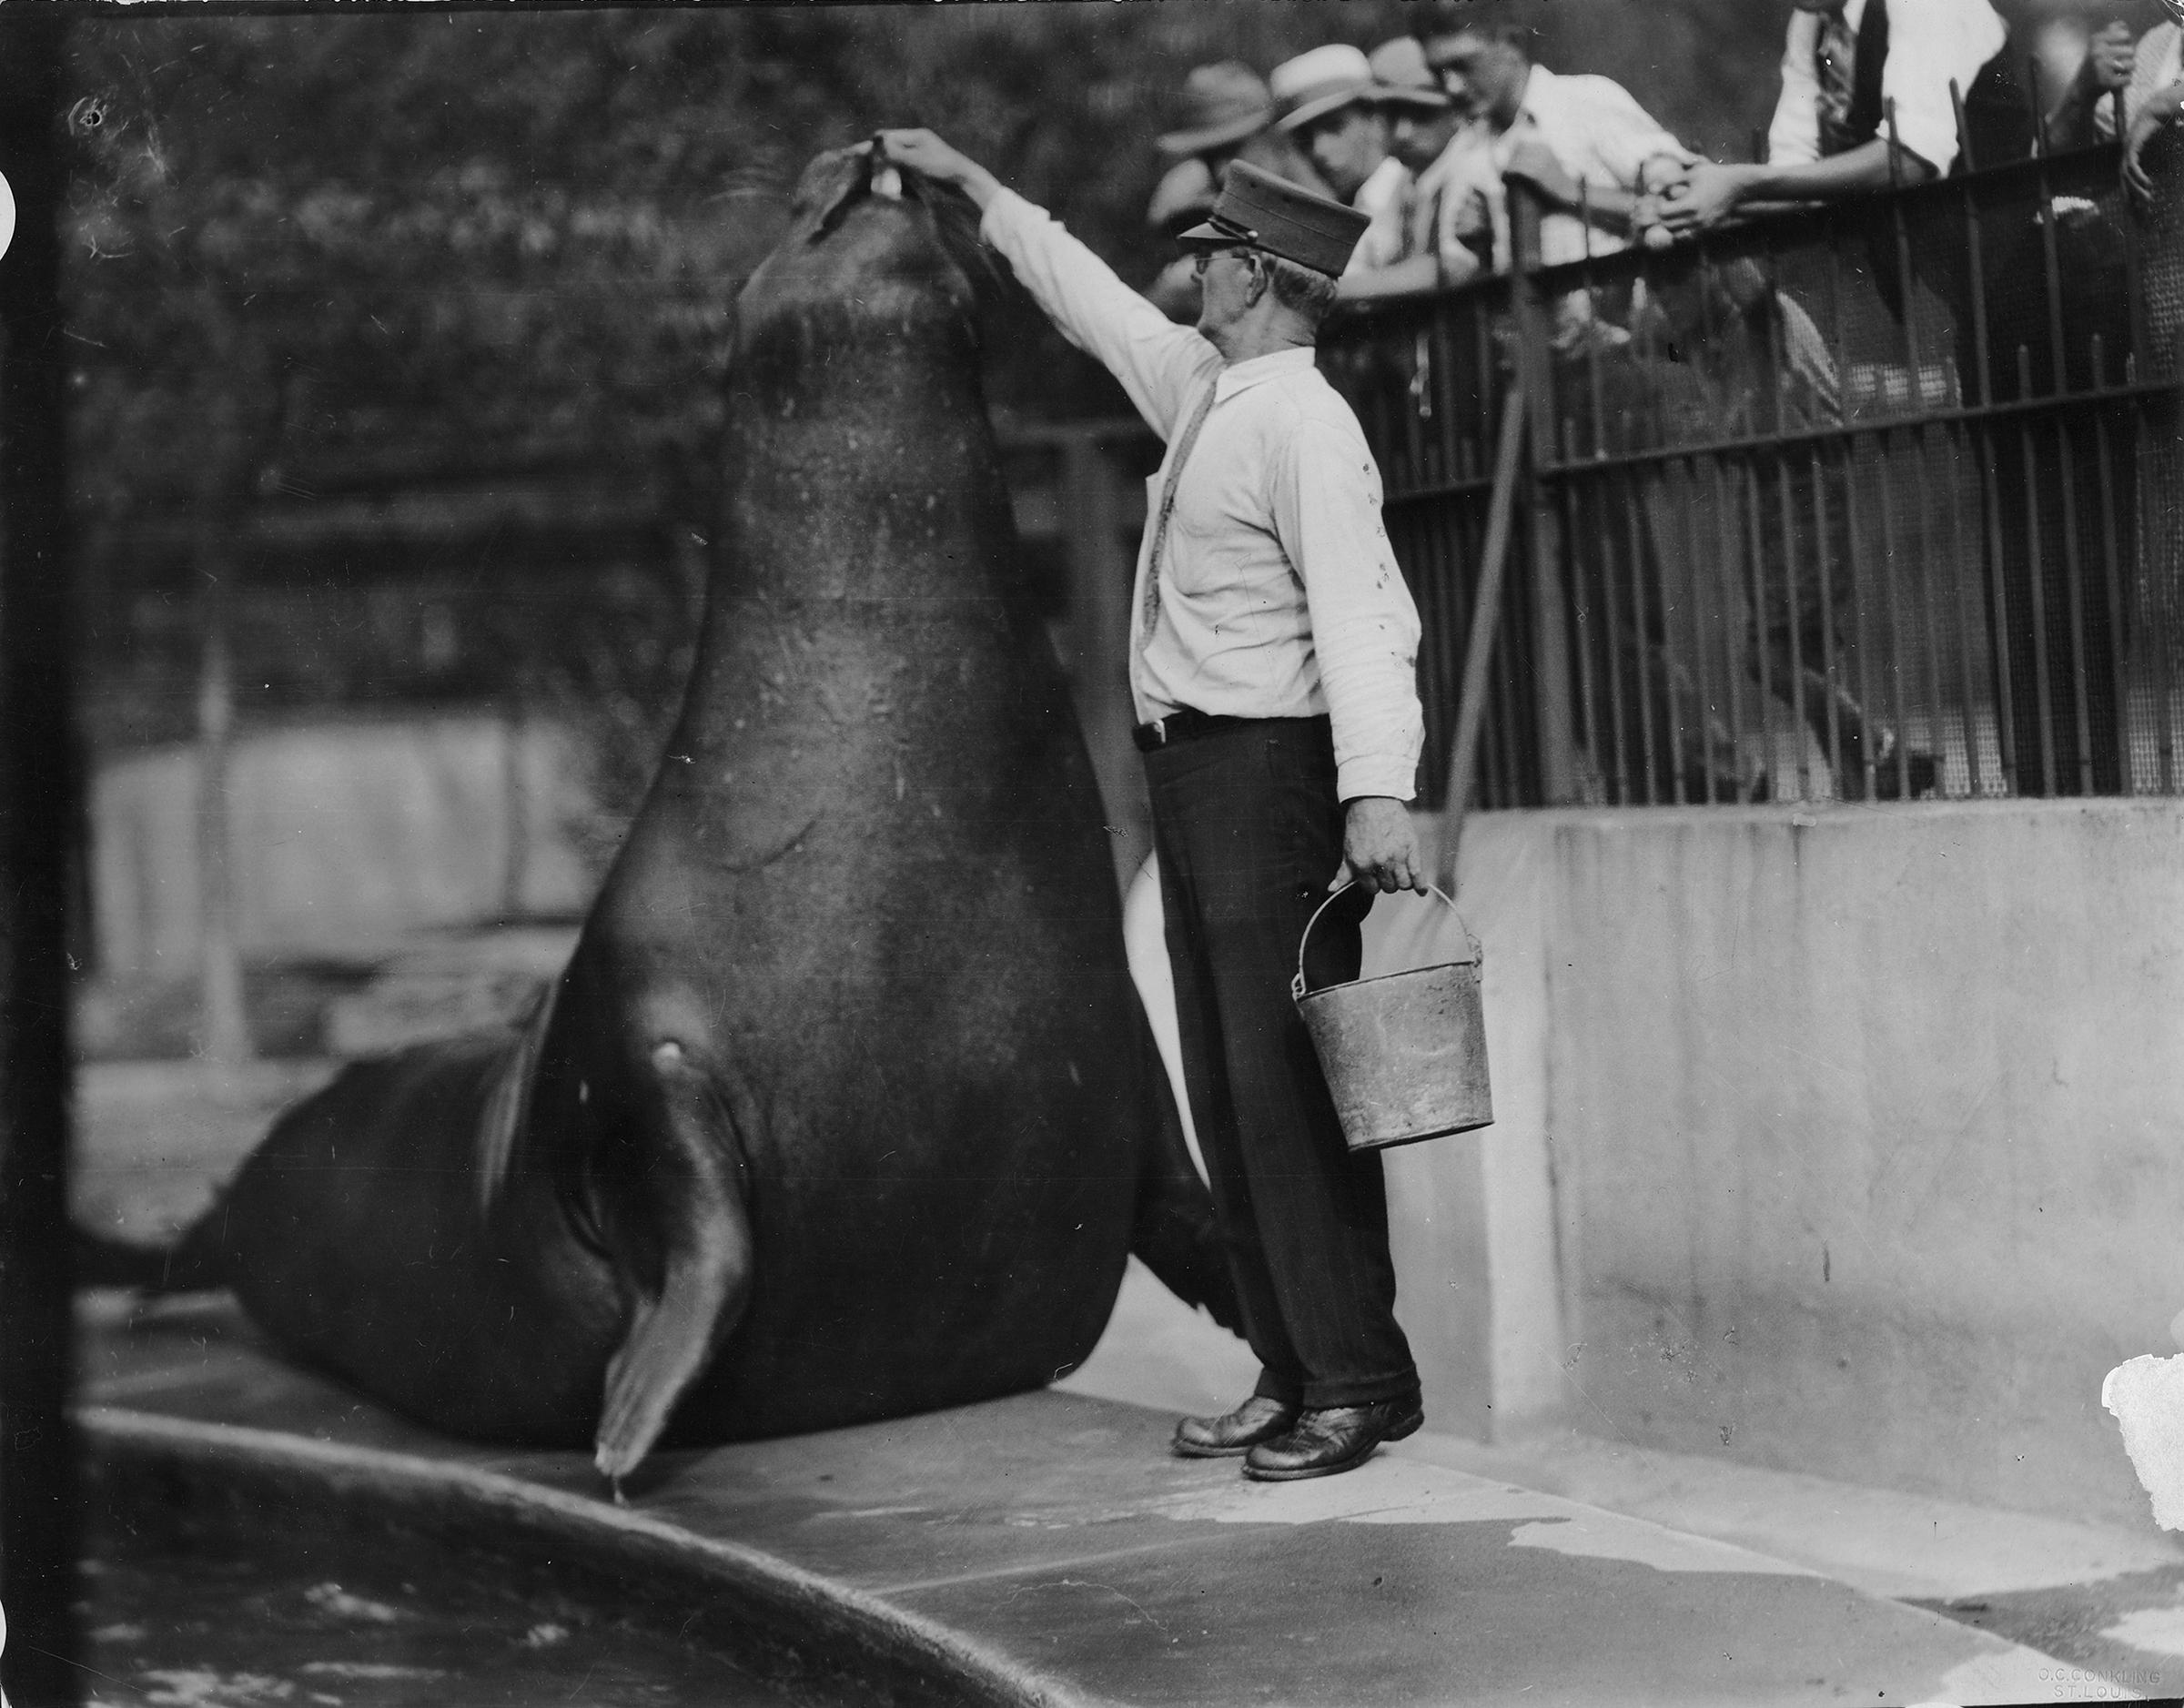 The Sea Lion Pool, built in 1879 and shown here in the 1920s, once served as the zoo's focal point. (Courtesy Chicago Park District and Chicago History Museum)